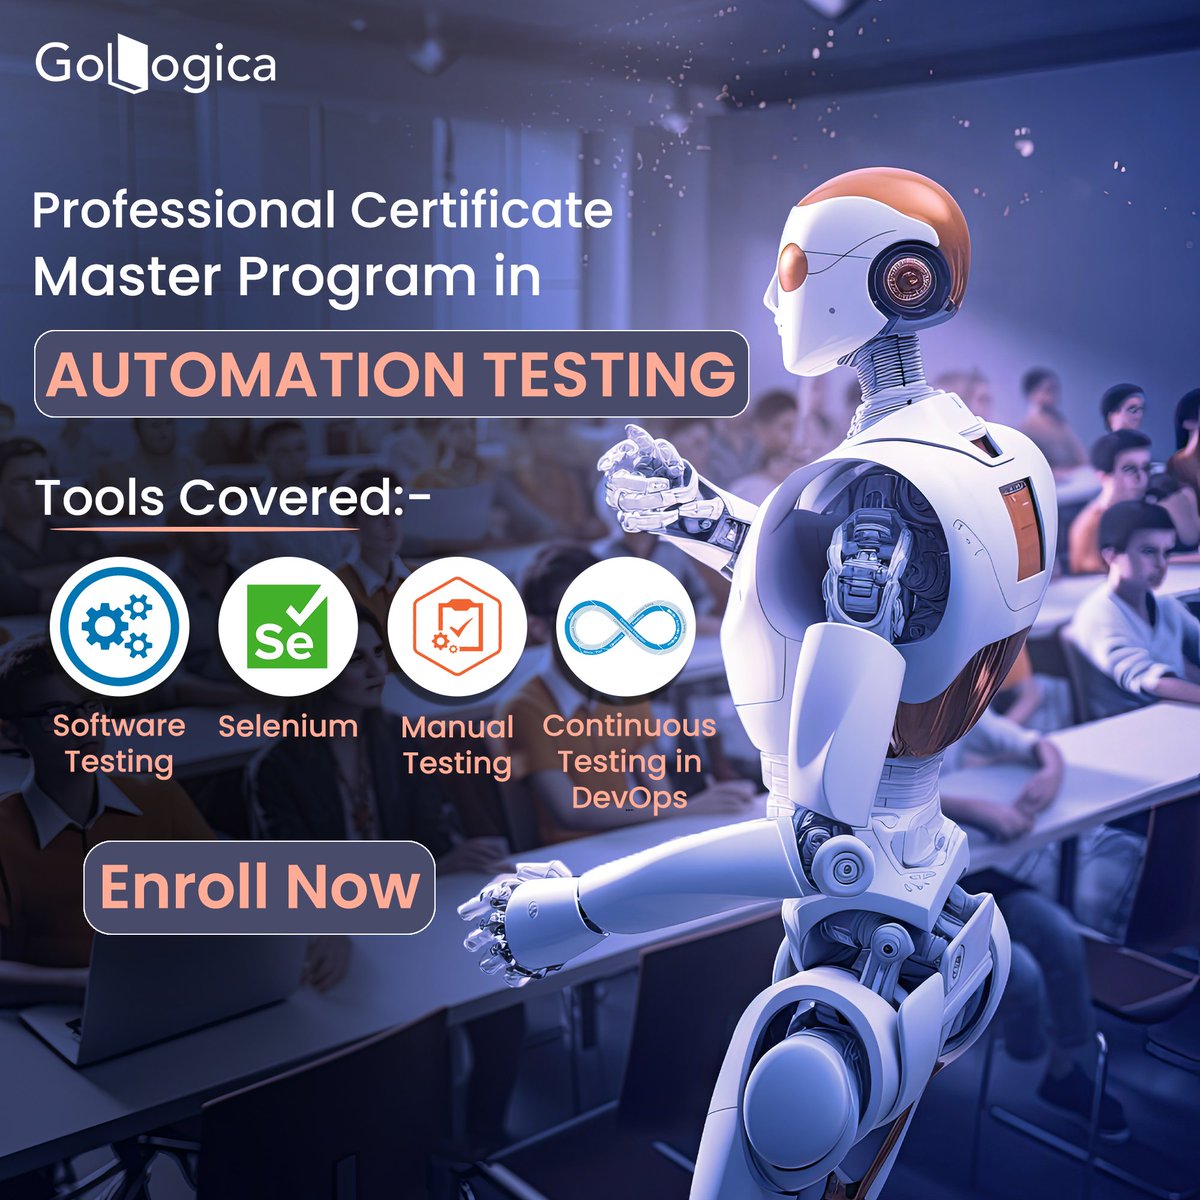 📷 Advance Your Career with GoLogica on Automation Testing Masters Program! 📷
For More Details: gologica.com
#GoLogica #testing #testingengineers #automation #developers #india #jobseekers #careergrowth #usa #Students